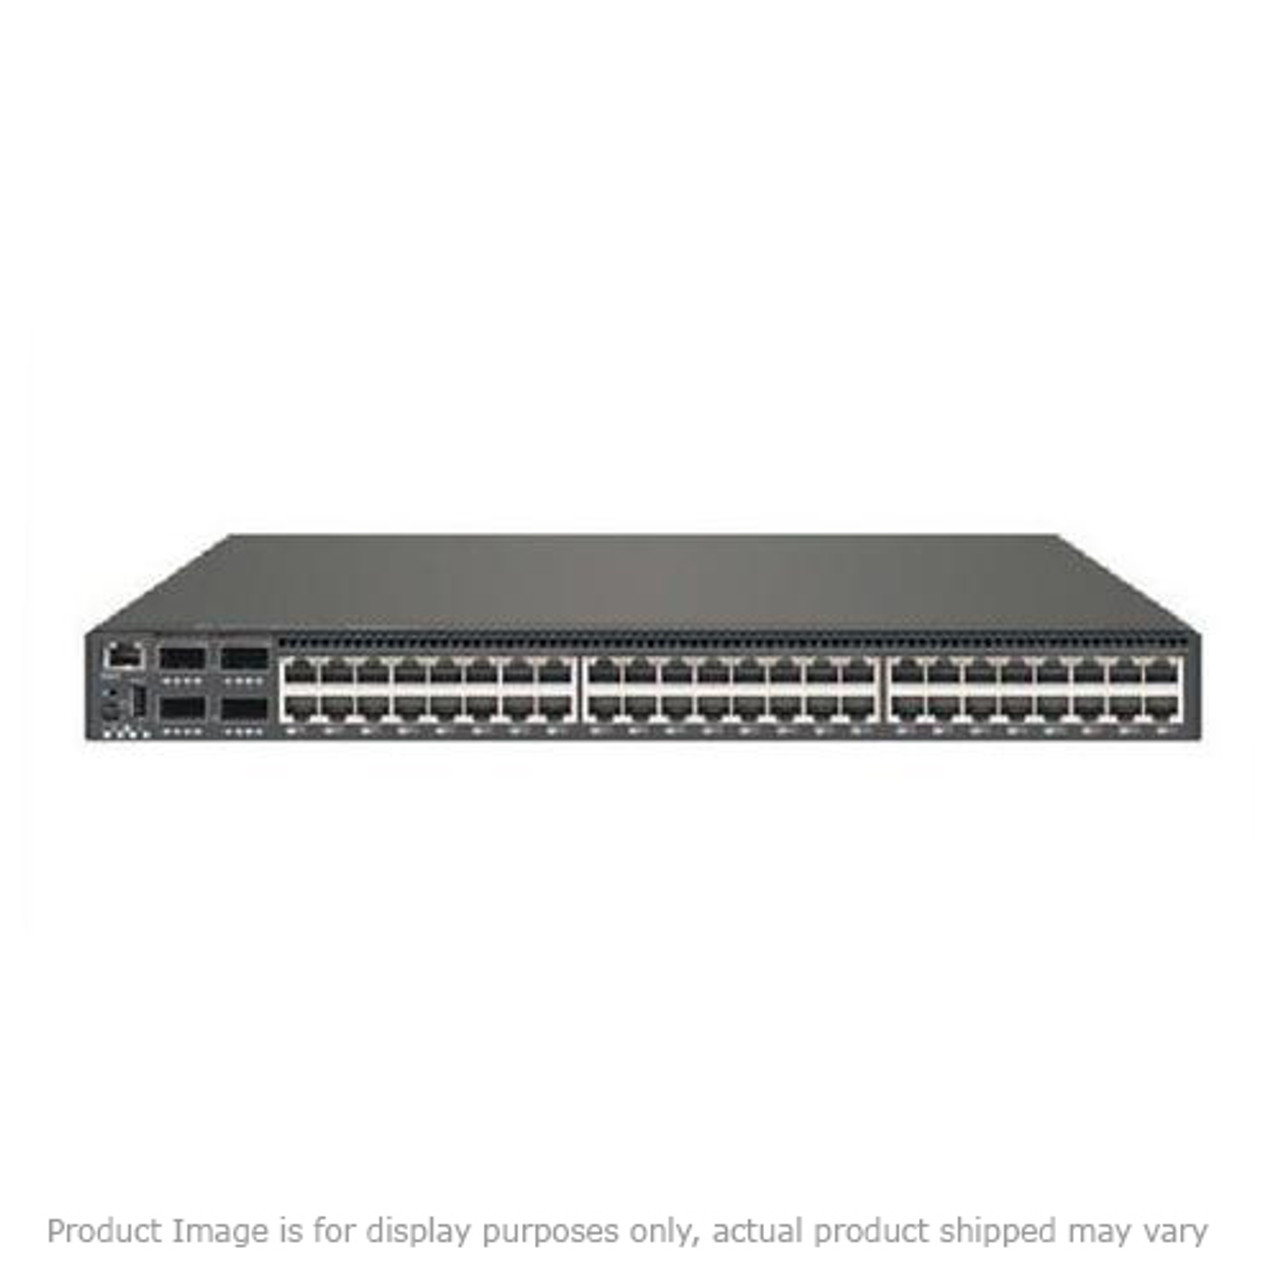 DS1404061-E5 Nortel Ethernet Routing Switch 8608GTM 8Port GBIC Expanded Memory Gigabit Ethernet (Refurbished)